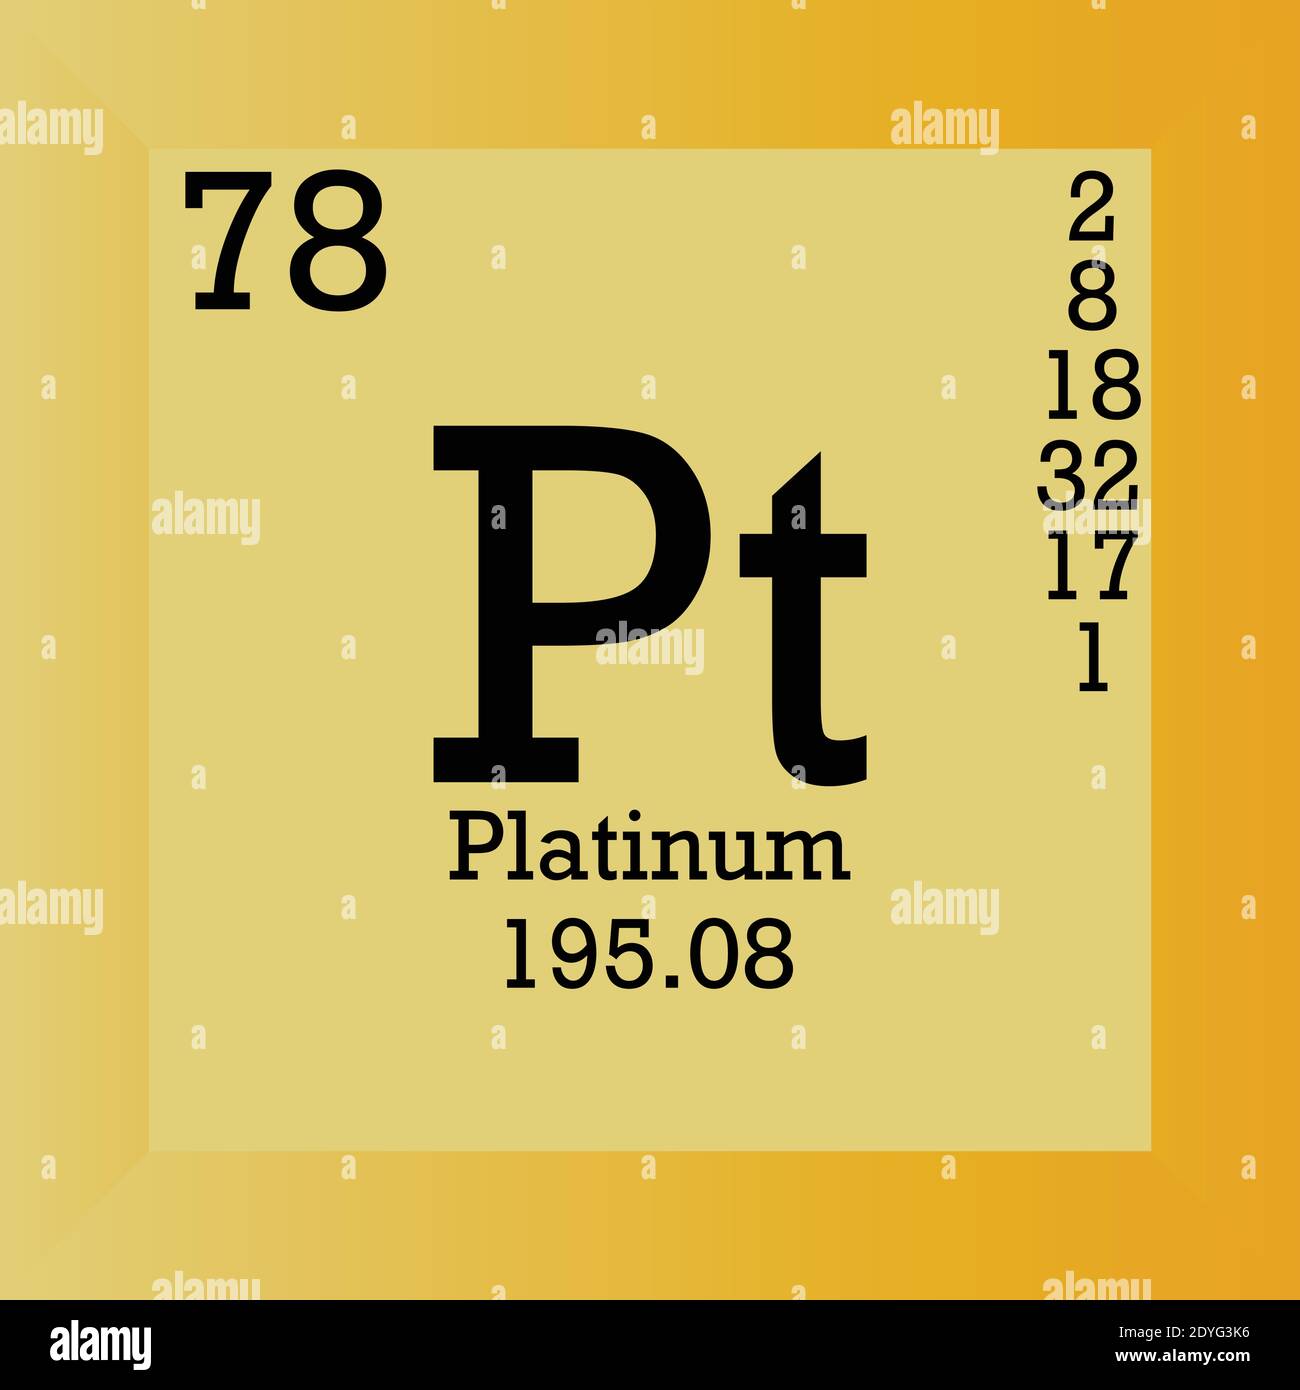 Pt Platinum Chemical Element Periodic Table. Single vector illustration,  element icon with molar mass, atomic number and electron conf Stock Vector  Image & Art - Alamy